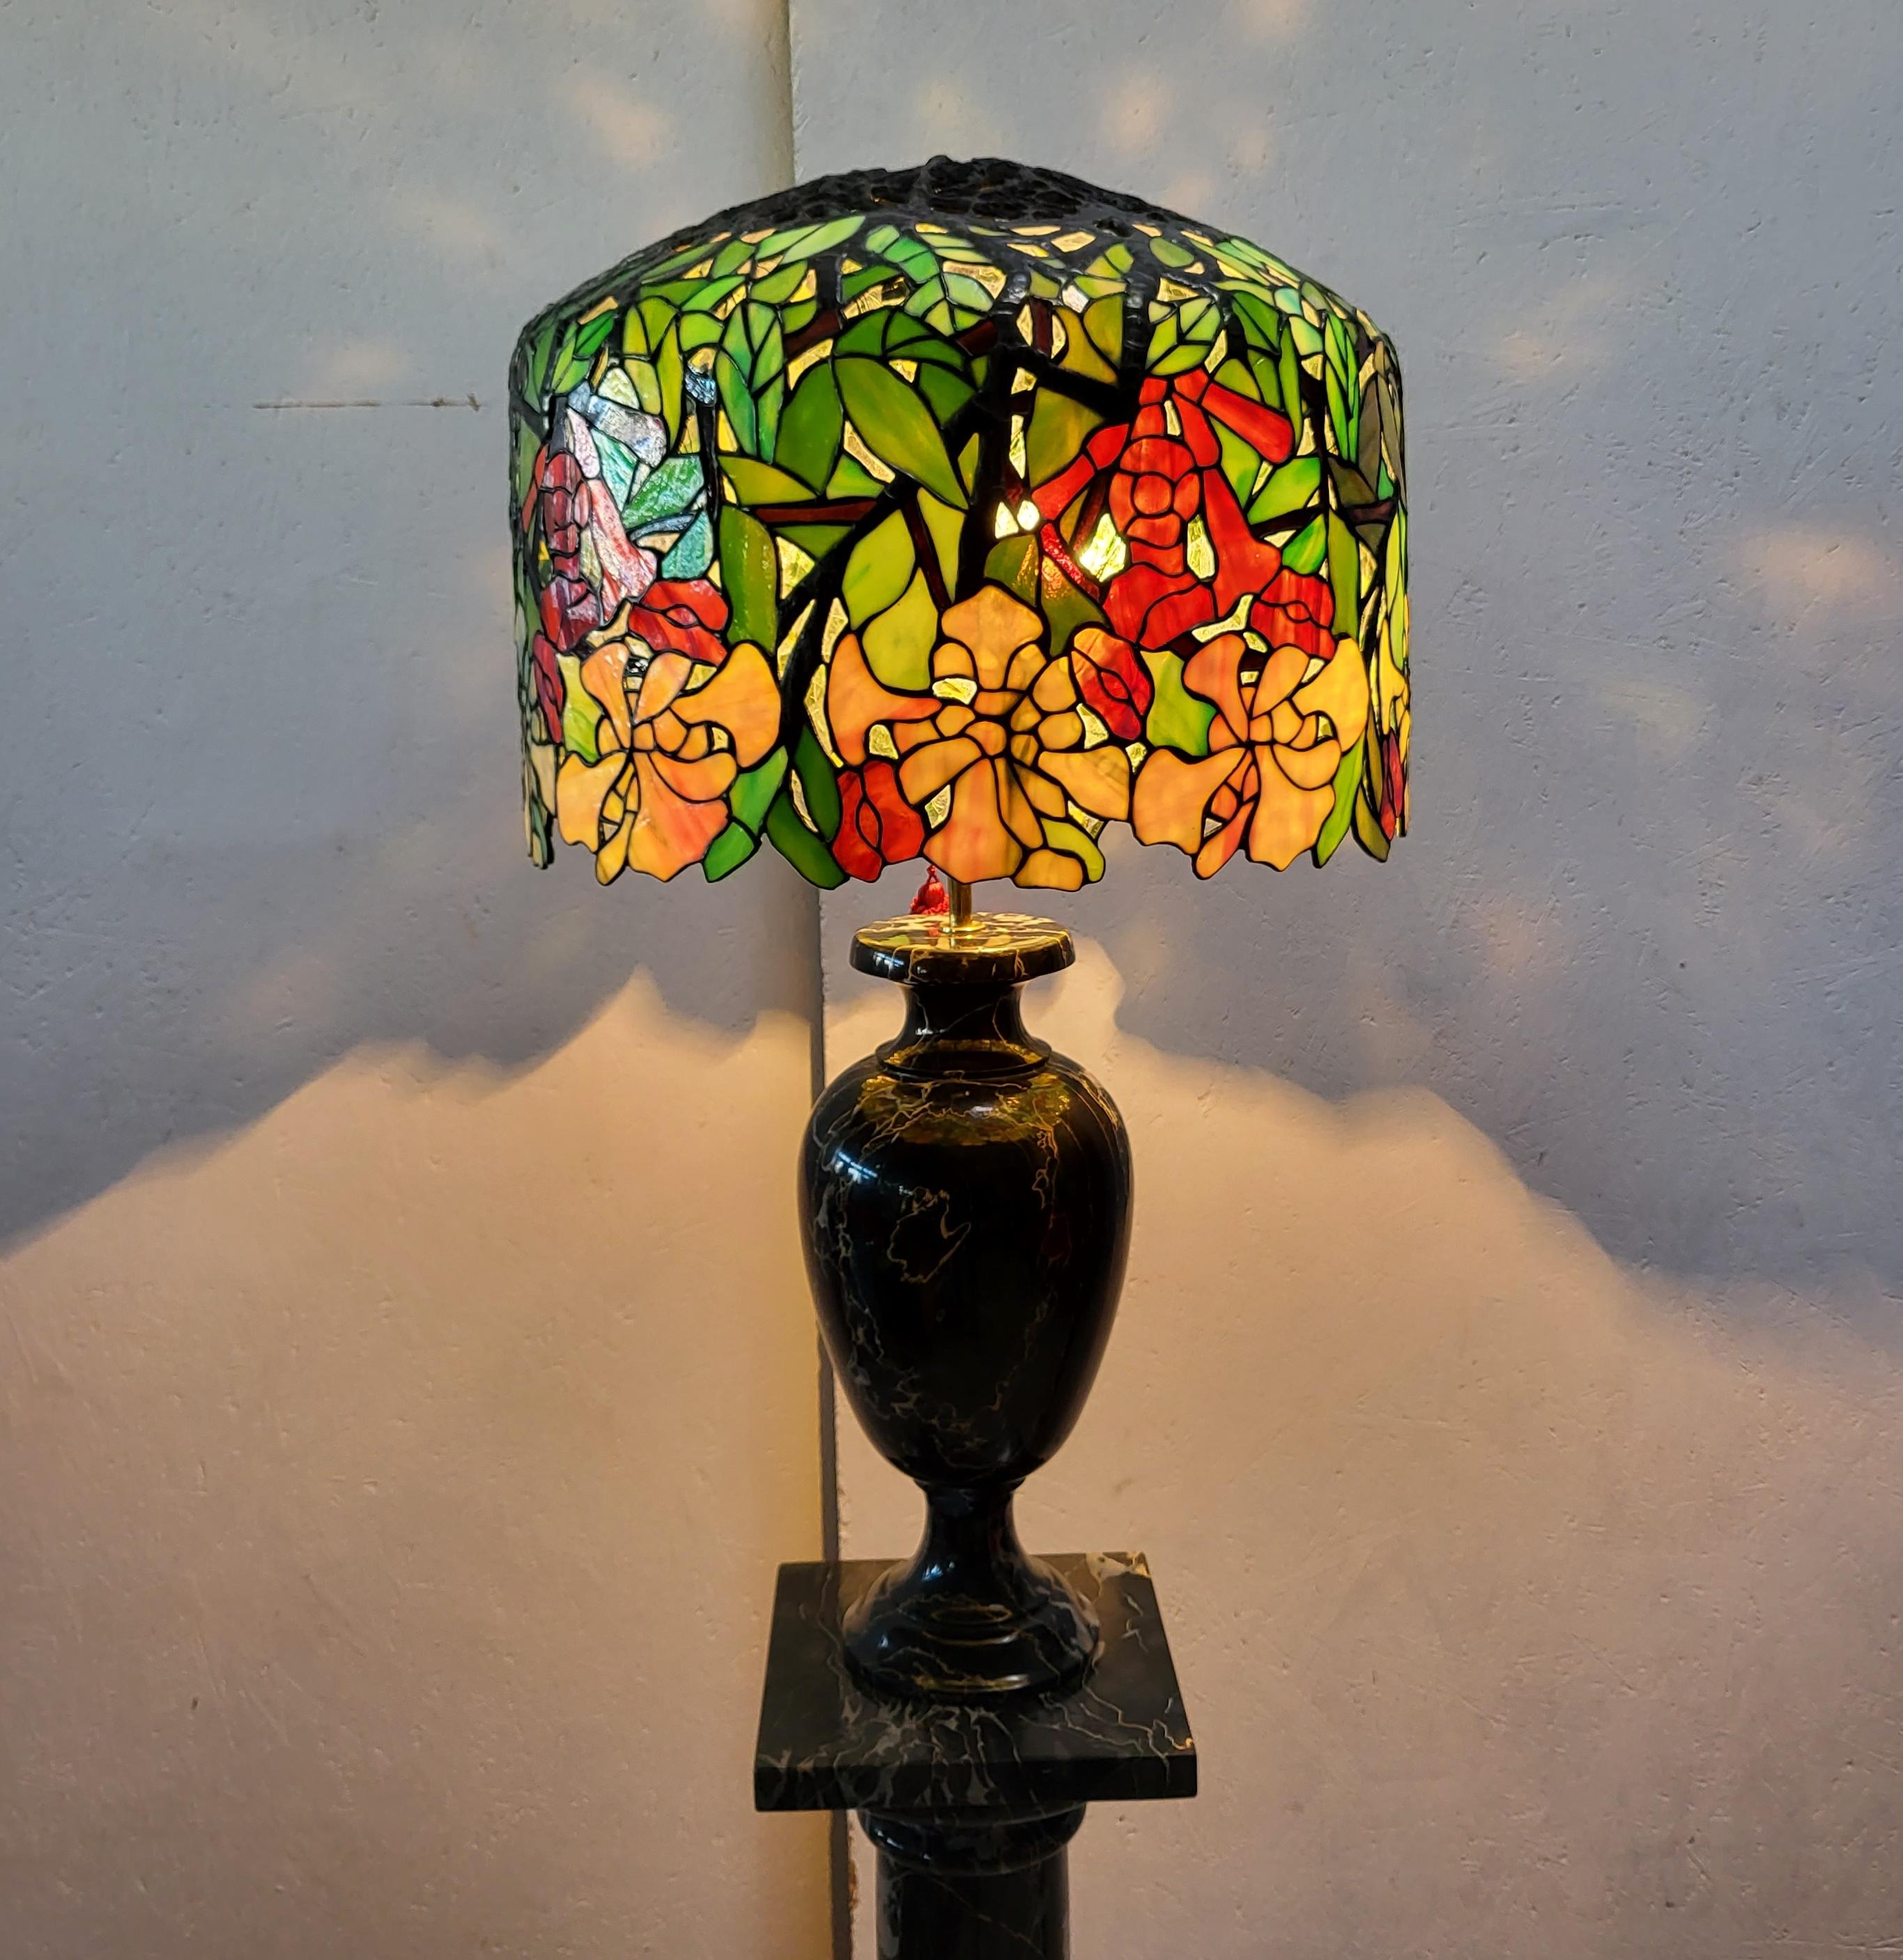 Stunning and amazing lamp in the manner of Tiffany Studios. 
Very impressive handmade lamp with a wonderful Breccia marble base.
 
Very fine handwork, colourful glass.

The lamp has an amazing warm light and is a wonderful art object.
It comes in a